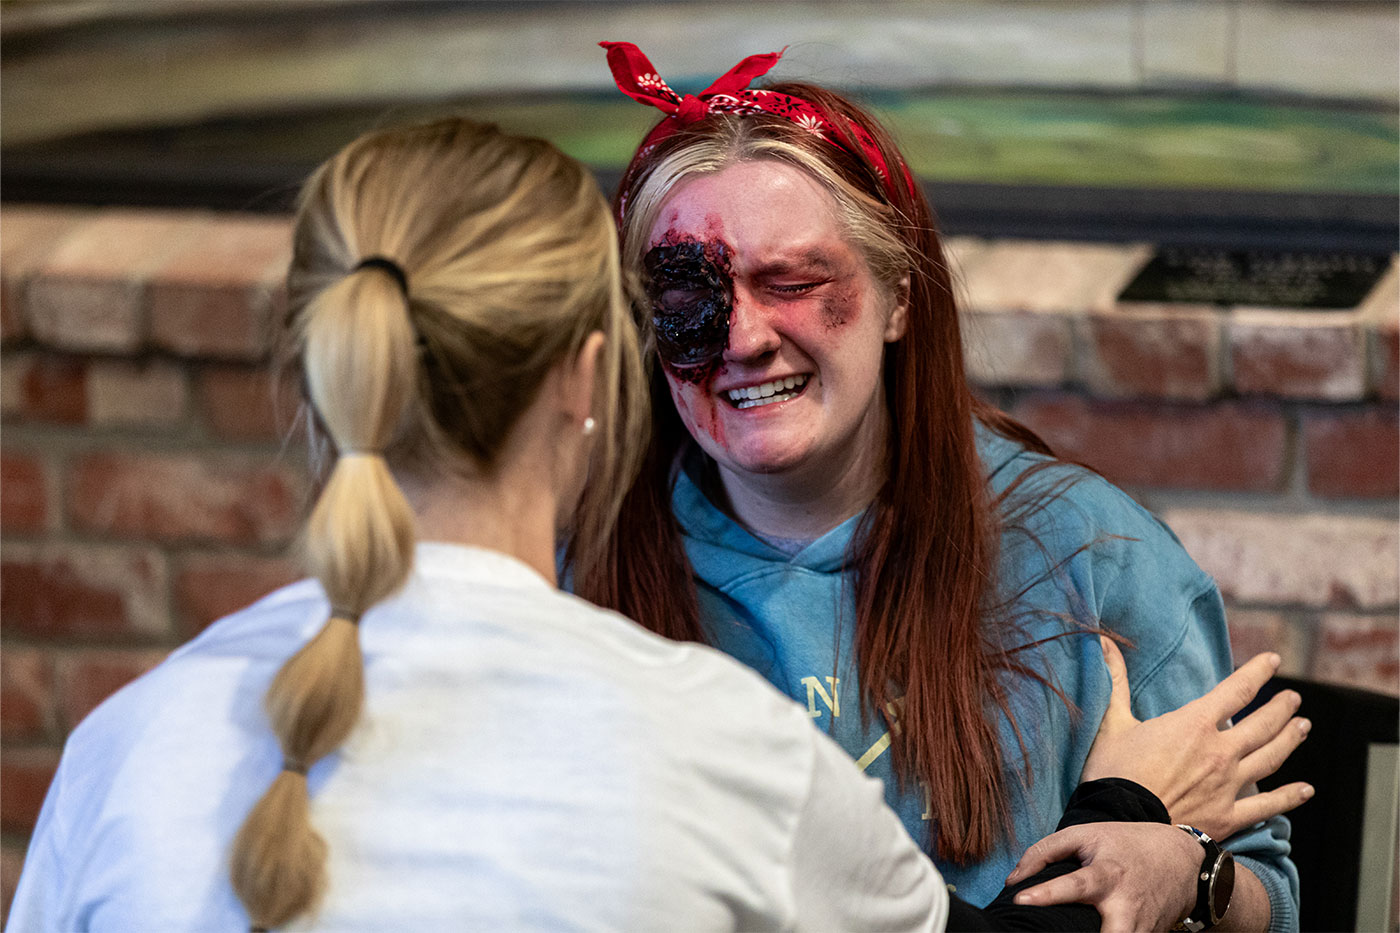 Theatre student with critical eye wound acting in simulation